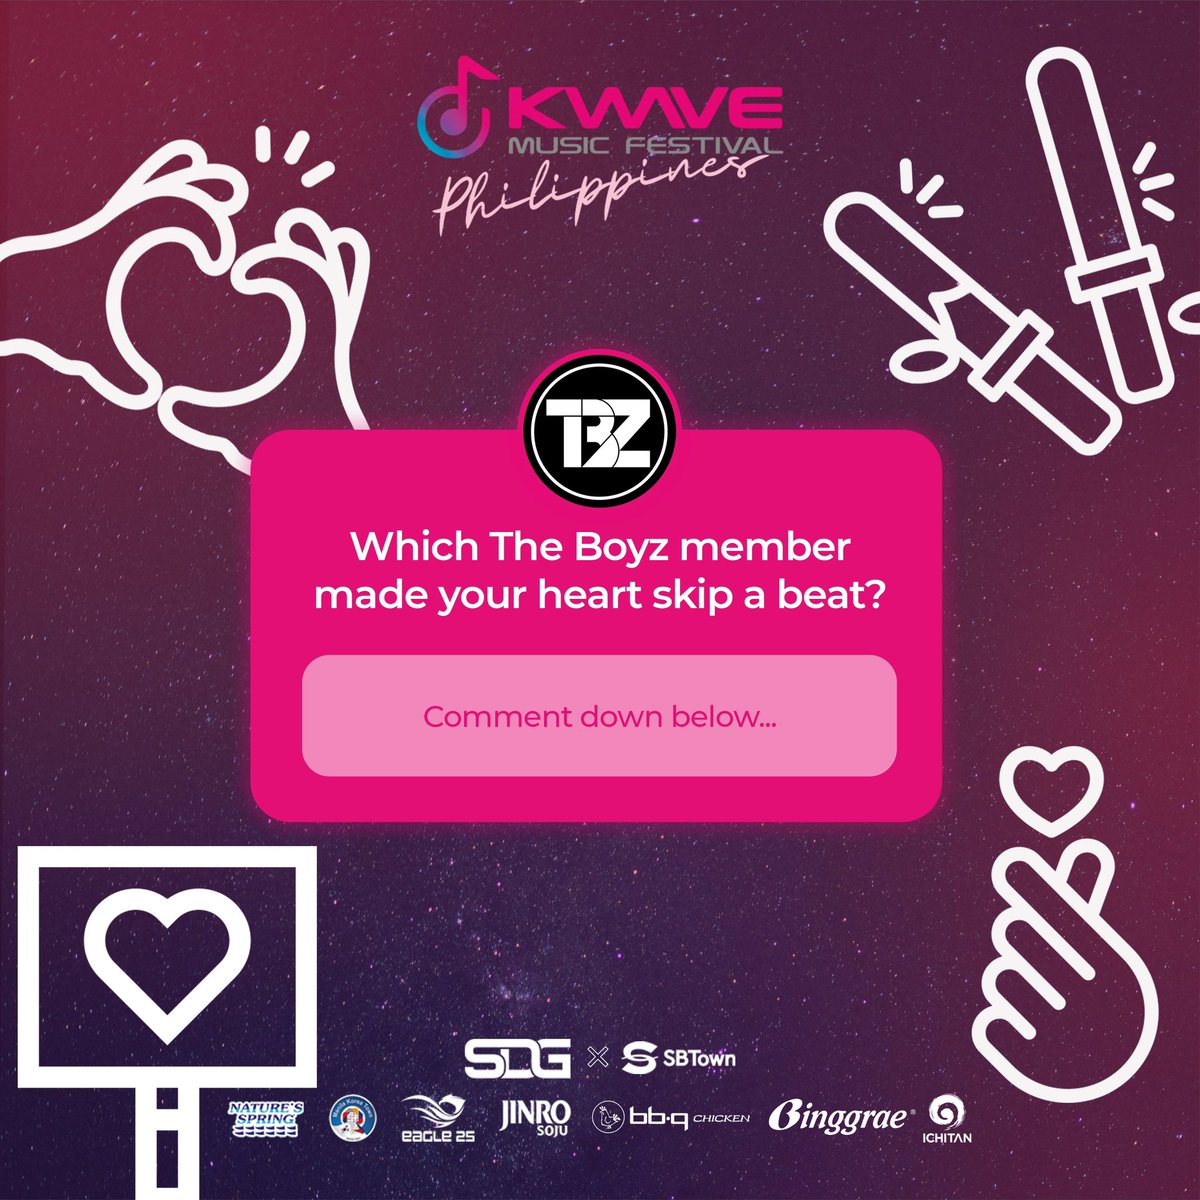 It’s a dream come true, KWAVERS!

Run, run, baby~ which member will you go to? Can’t deny that @IST_THEBOYZ will be your nectar this May 11! 🎶

#THEBOYZ #fromis_9 #PLUUS #YGIG #YARA #KAIA #KWAVEPH #AbsolutelyLibre #KWAVEMusicFestival #BadmintonAsia #KWAVE